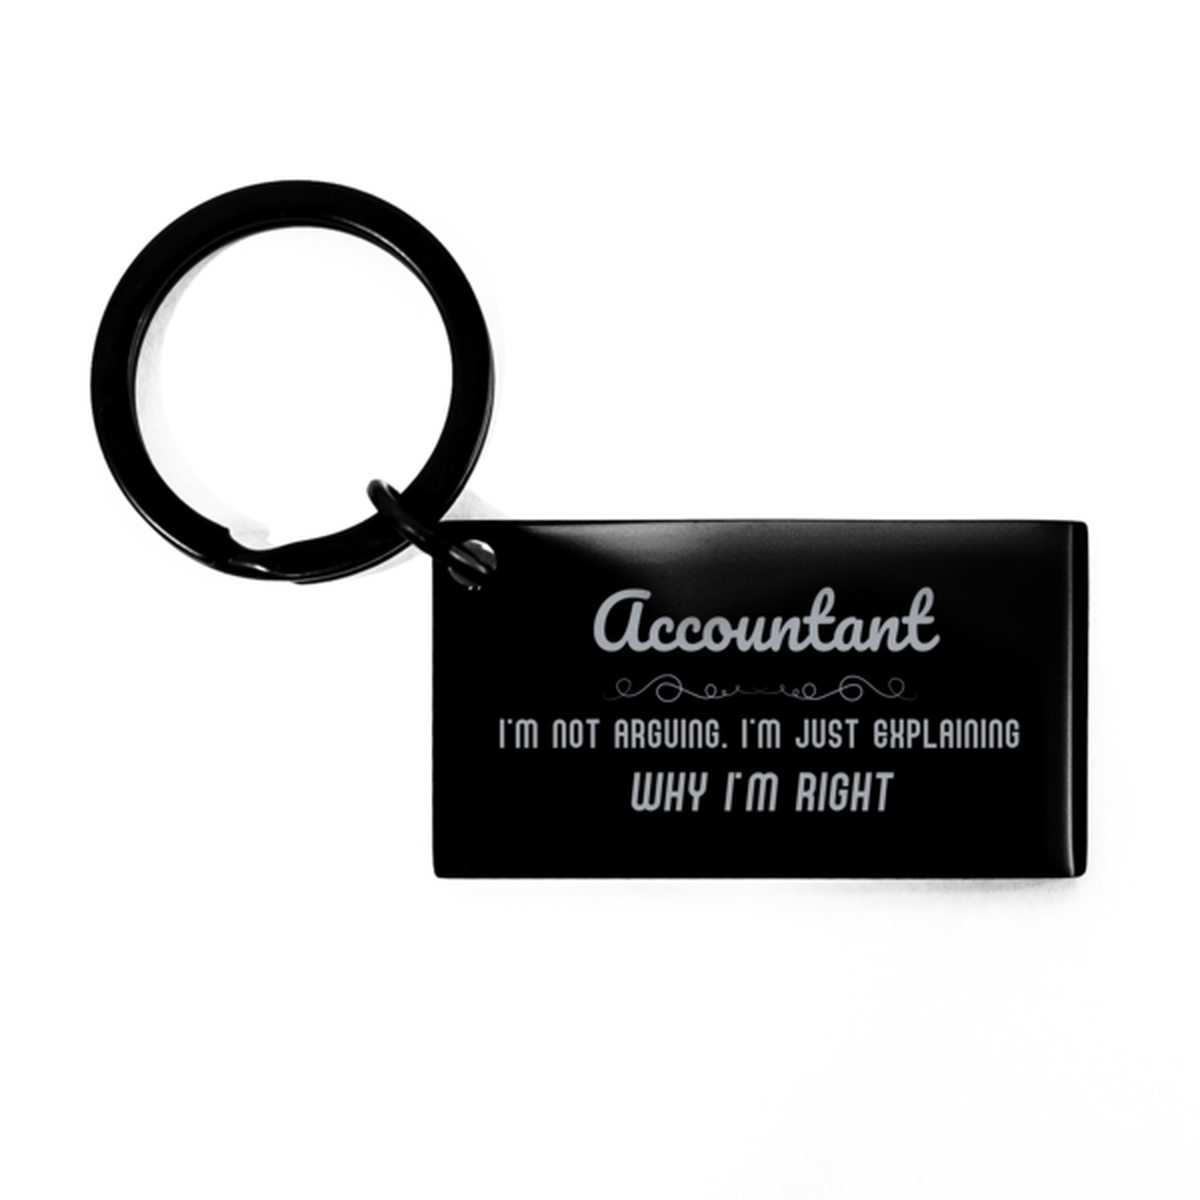 Accountant I'm not Arguing. I'm Just Explaining Why I'm RIGHT Keychain, Funny Saying Quote Accountant Gifts For Accountant Graduation Birthday Christmas Gifts for Men Women Coworker